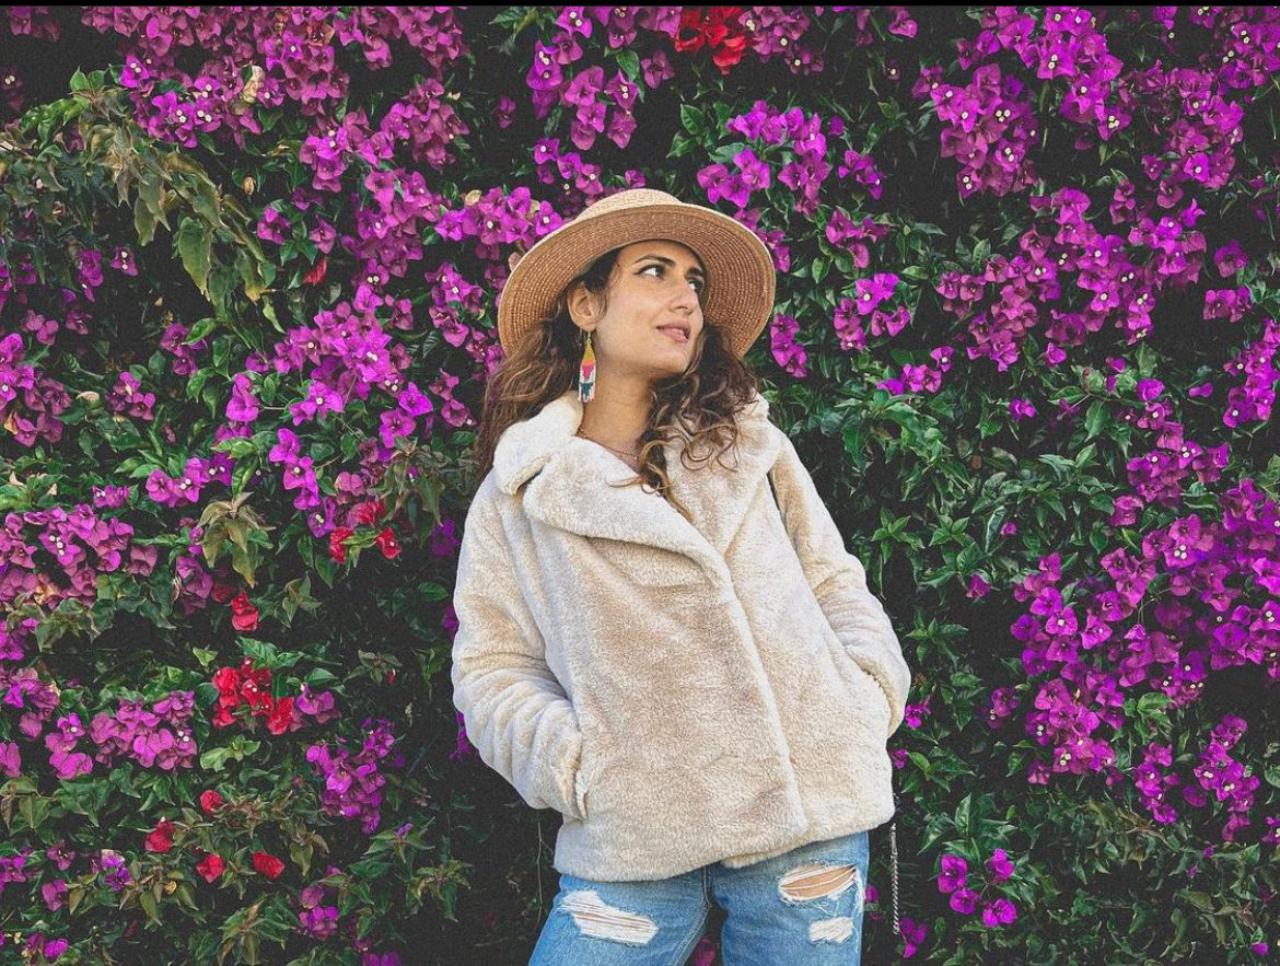 In her second look, the diva clicked an alluring picture of herself posing in the abode of nature adorned with pink flowers. She chose to style herself with a furry Blazer along with ripped jeans